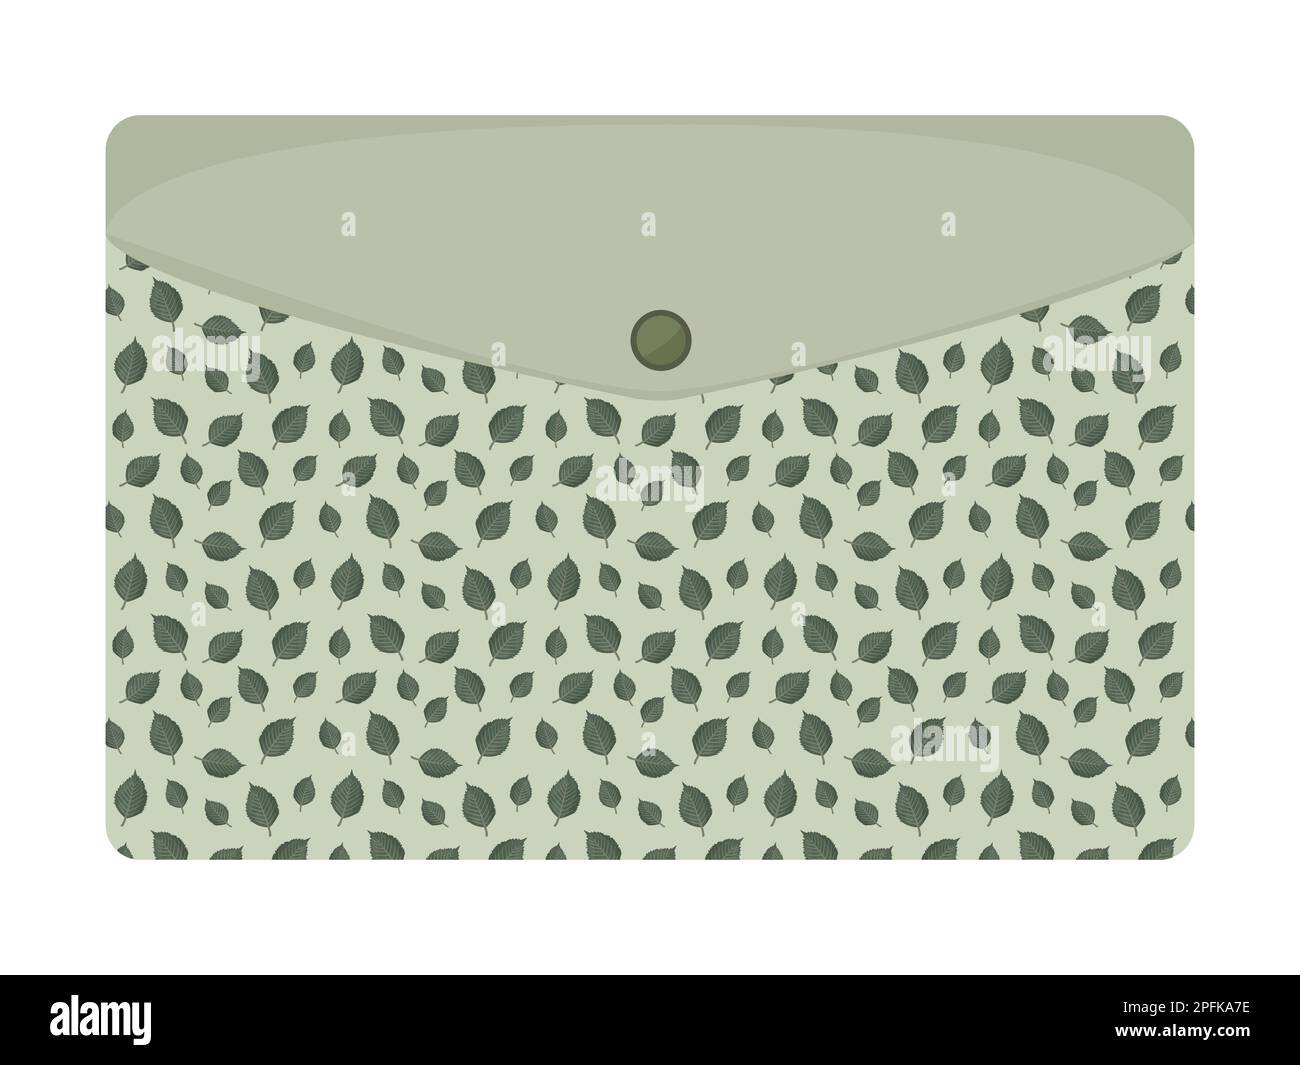 Green envelope with foliage pattern, monochrome illustration Stock Vector